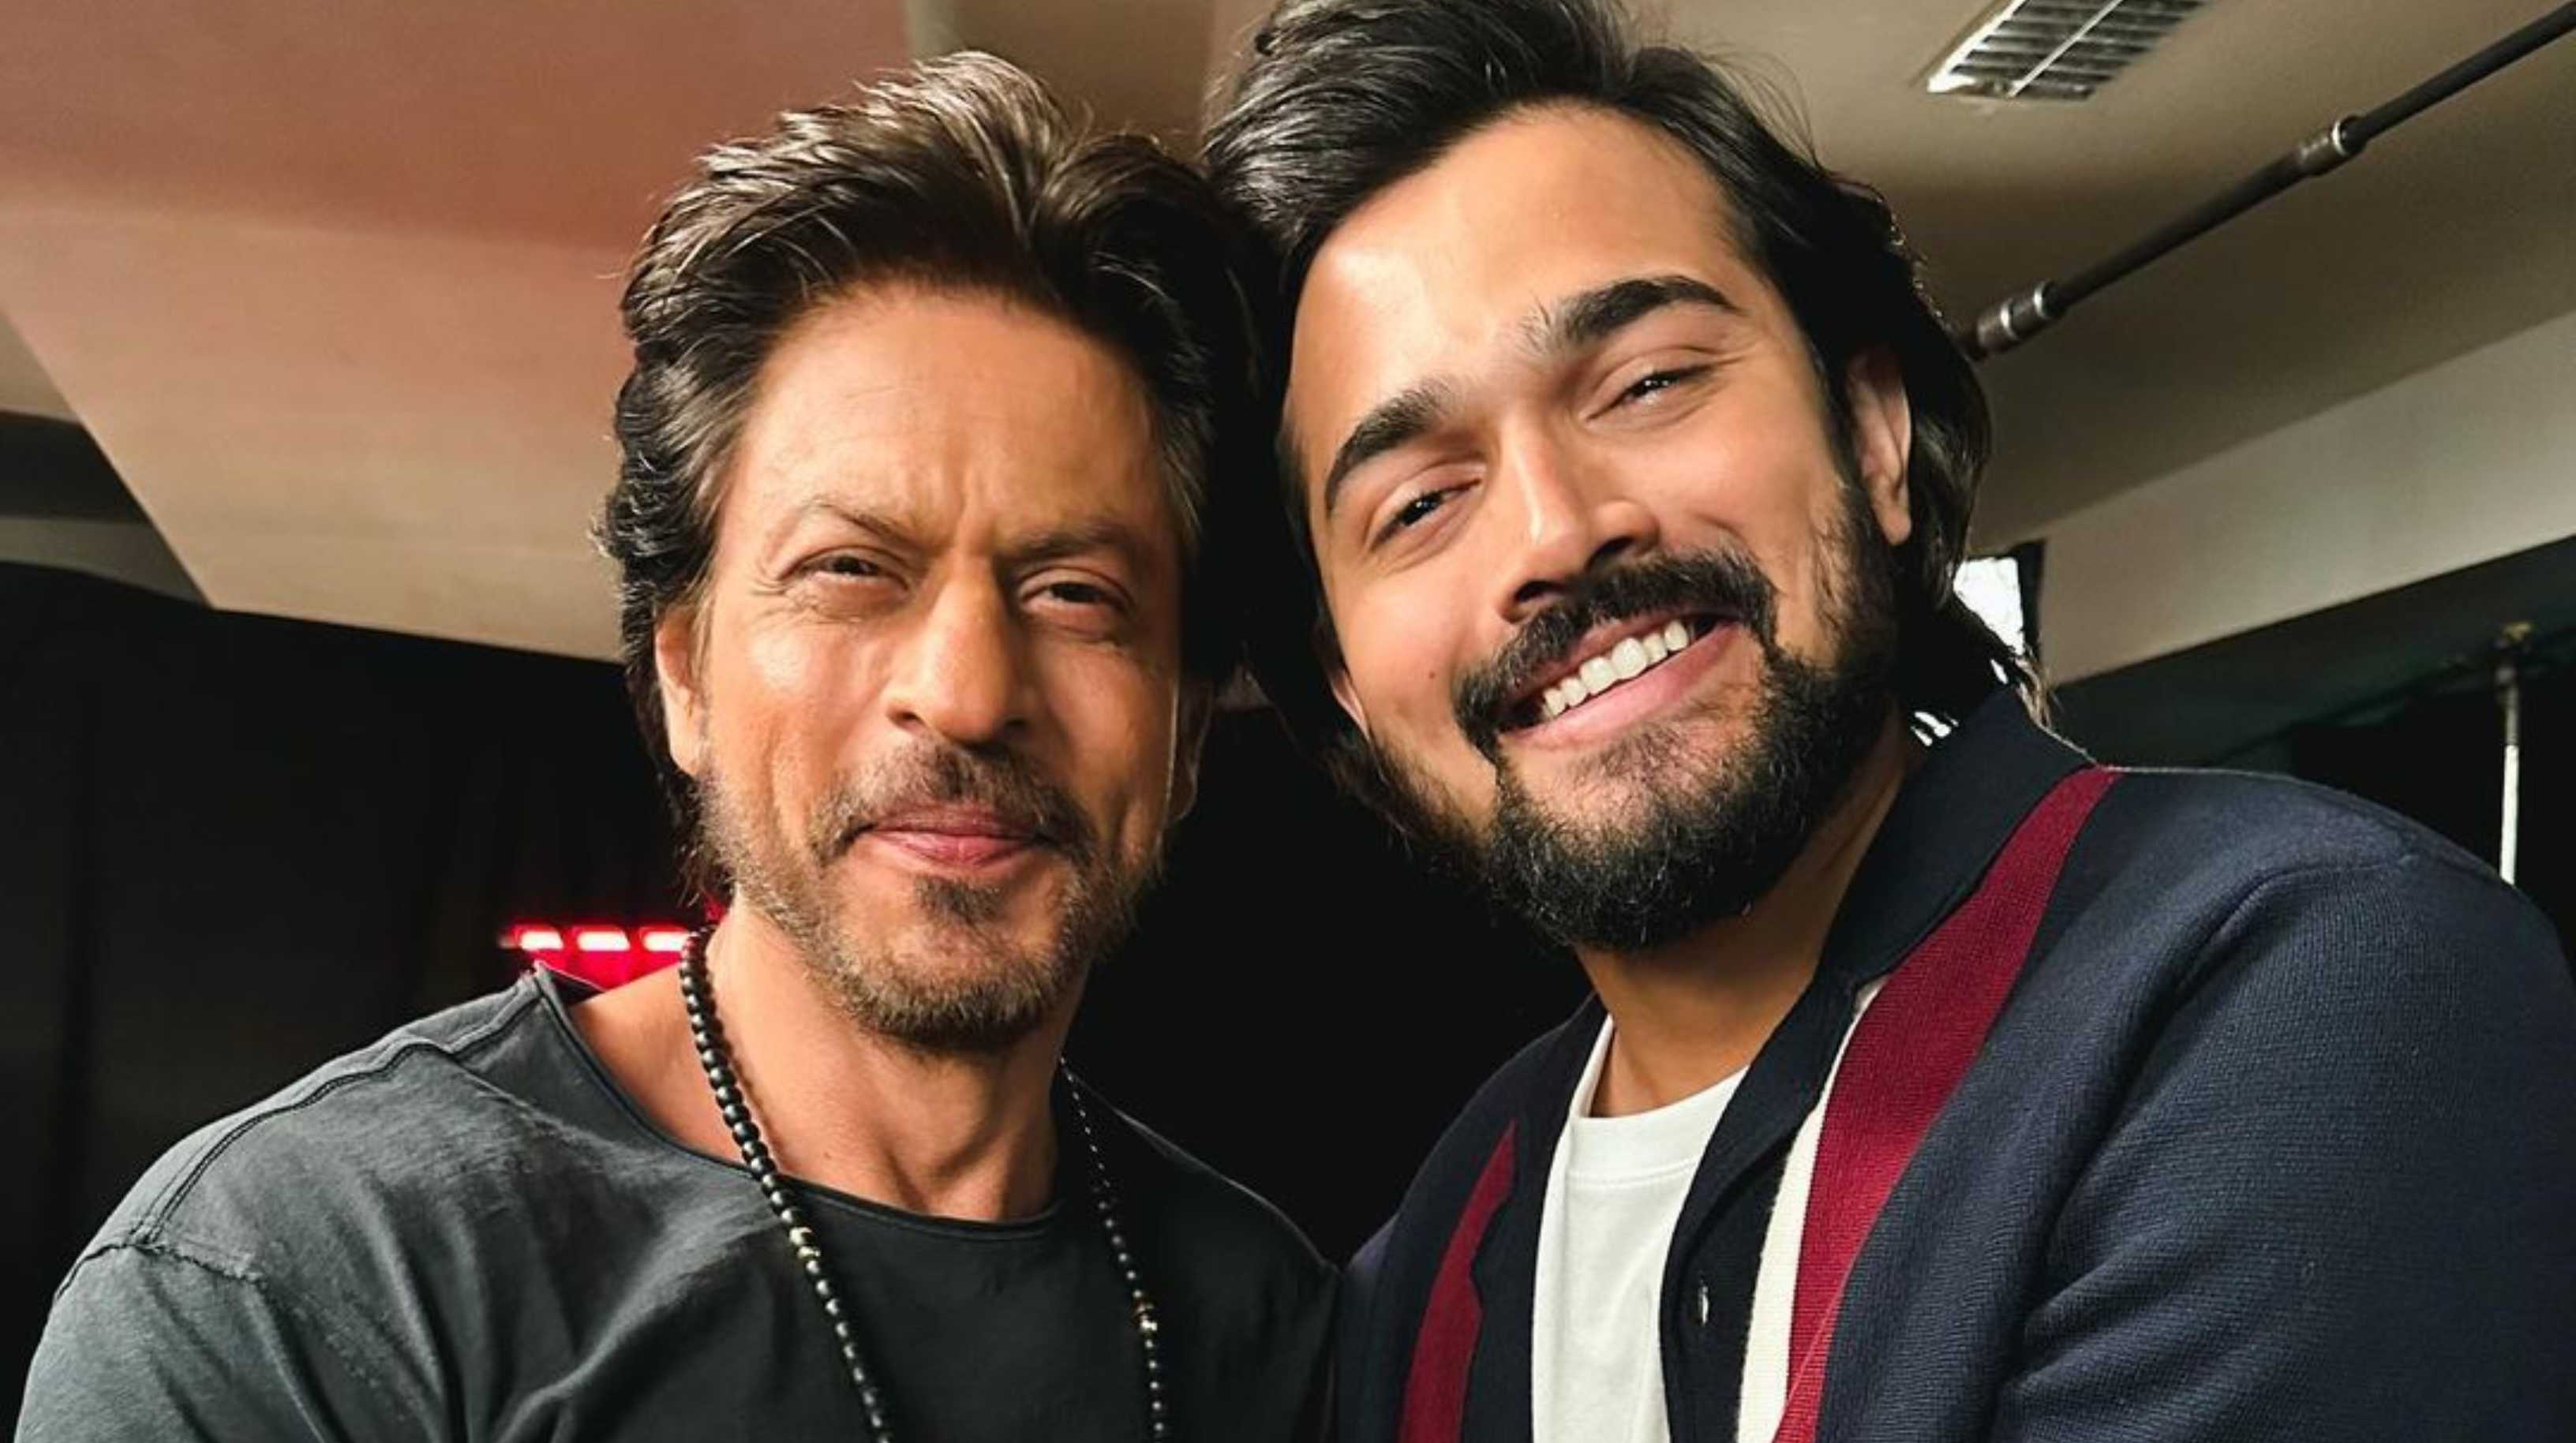 Shah Rukh Khan teases fans about Pathaan’s OTT release, but his chemistry with Bhuvan Bam steals the show; watch